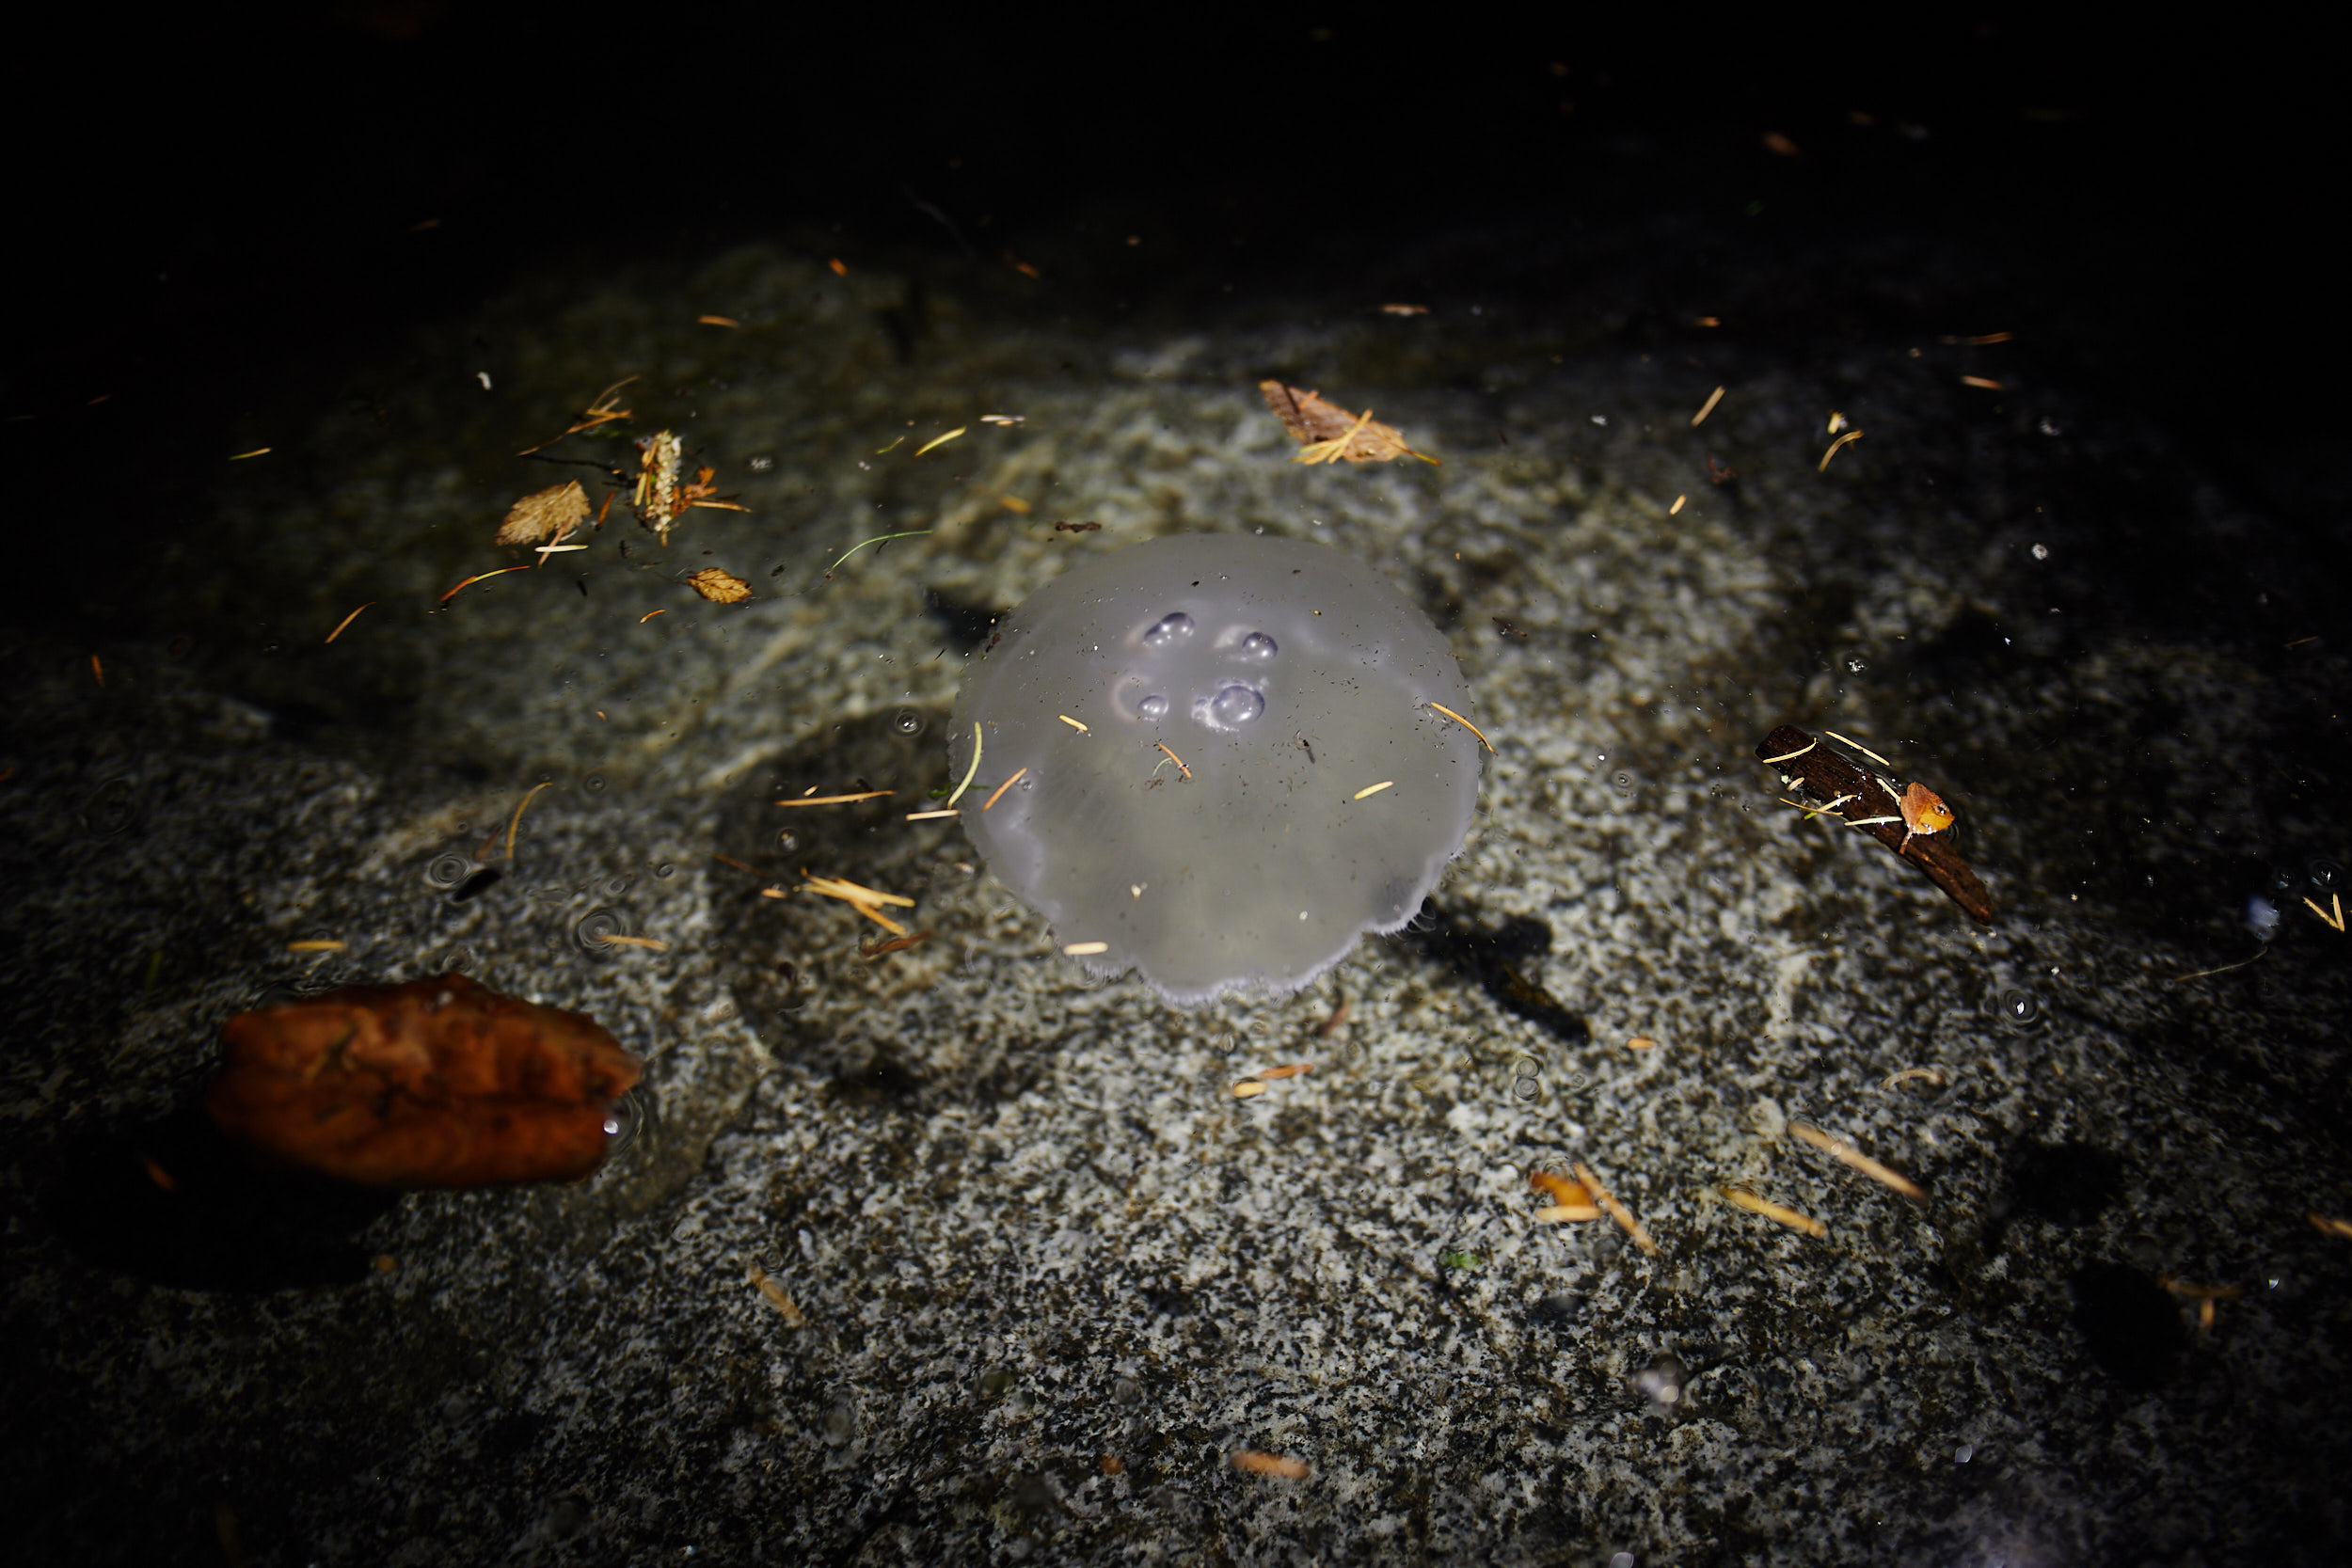  One of the smaller jelly fish we kept seeing. 